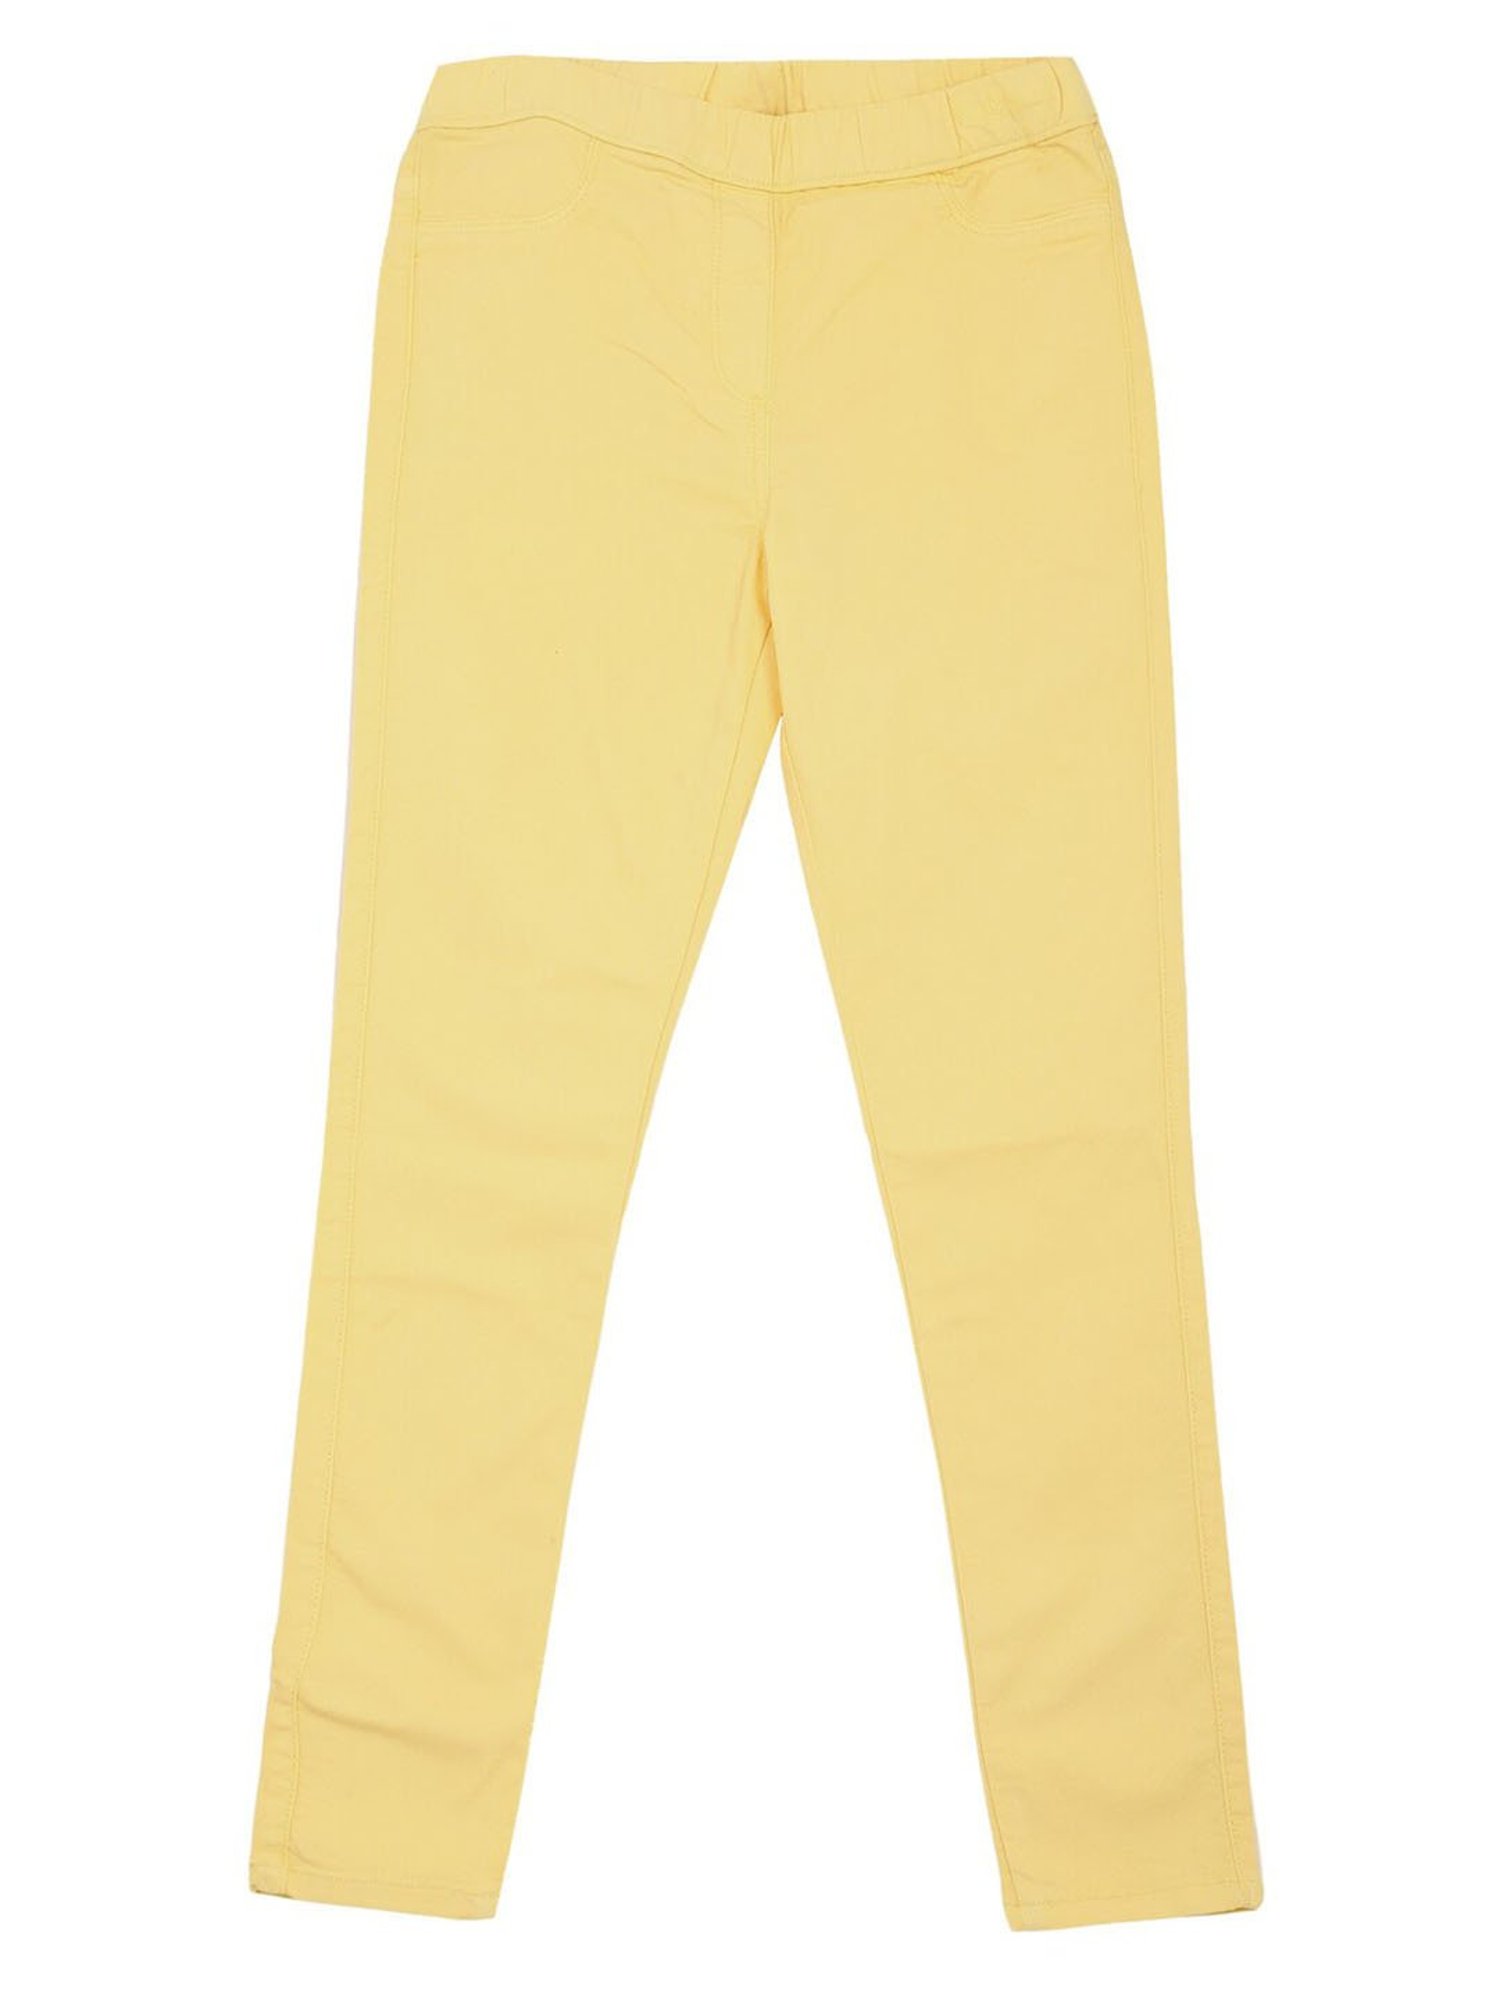 Buy Peter England Kids Pink Solid Jeggings for Girls Clothing Online @ Tata  CLiQ